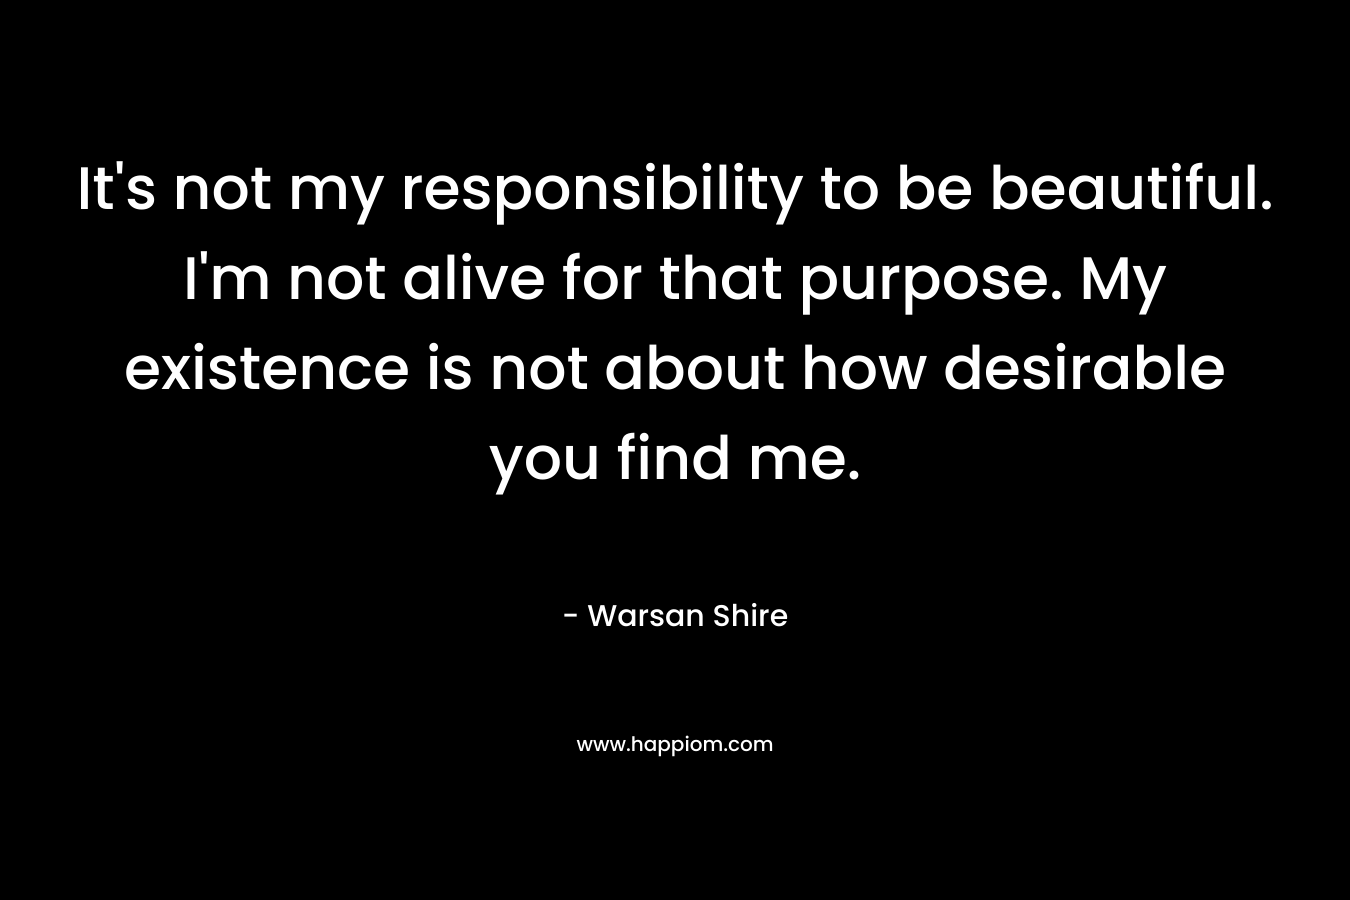 It’s not my responsibility to be beautiful. I’m not alive for that purpose. My existence is not about how desirable you find me. – Warsan Shire